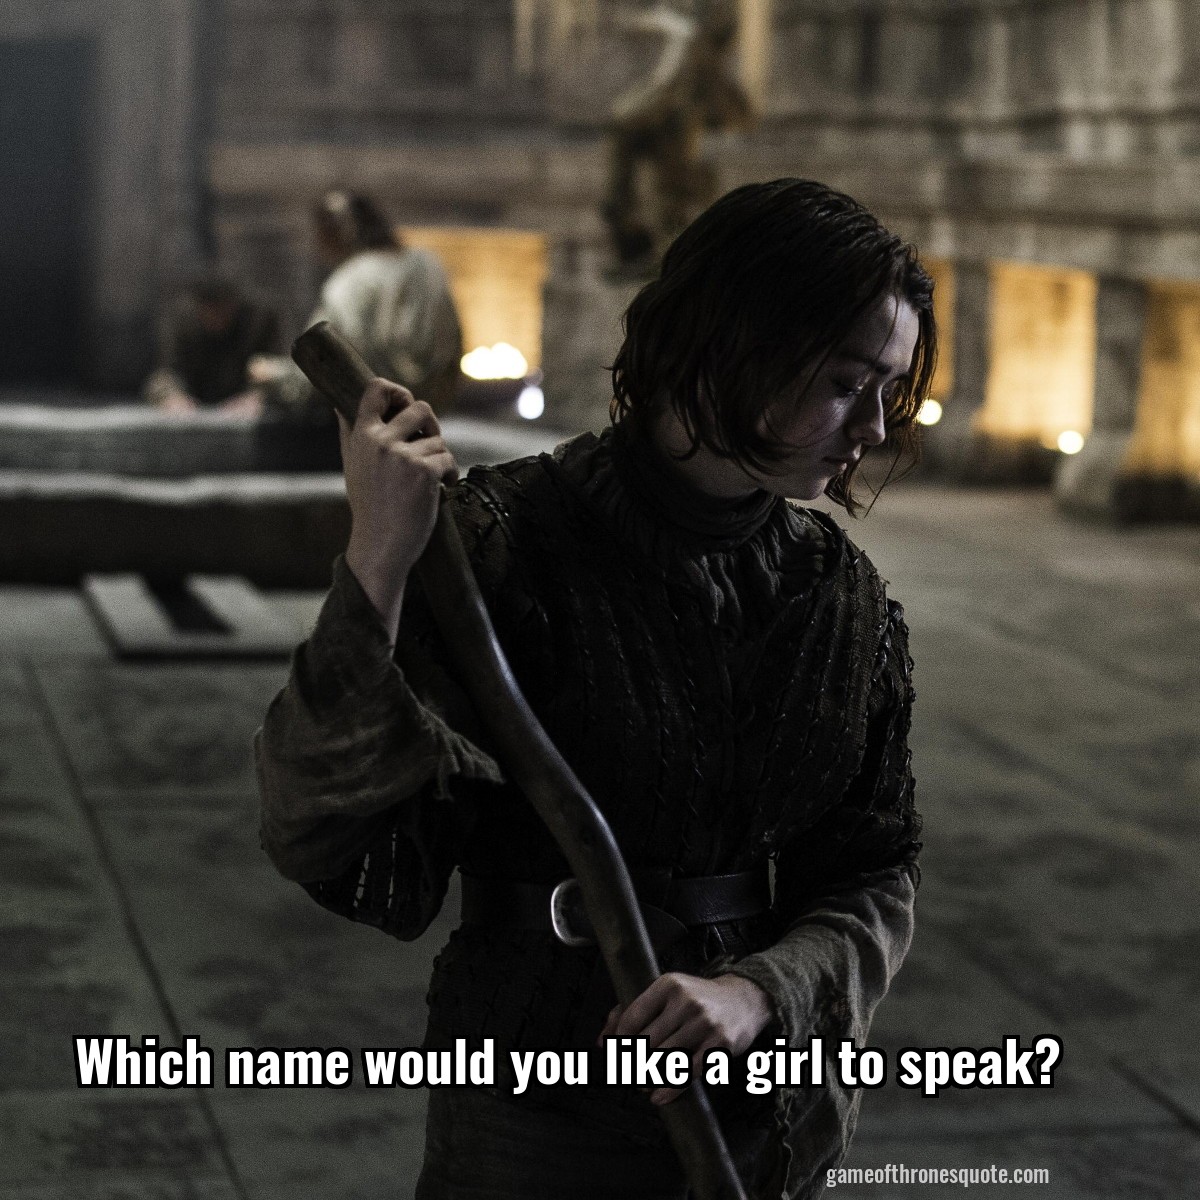 Which name would you like a girl to speak?